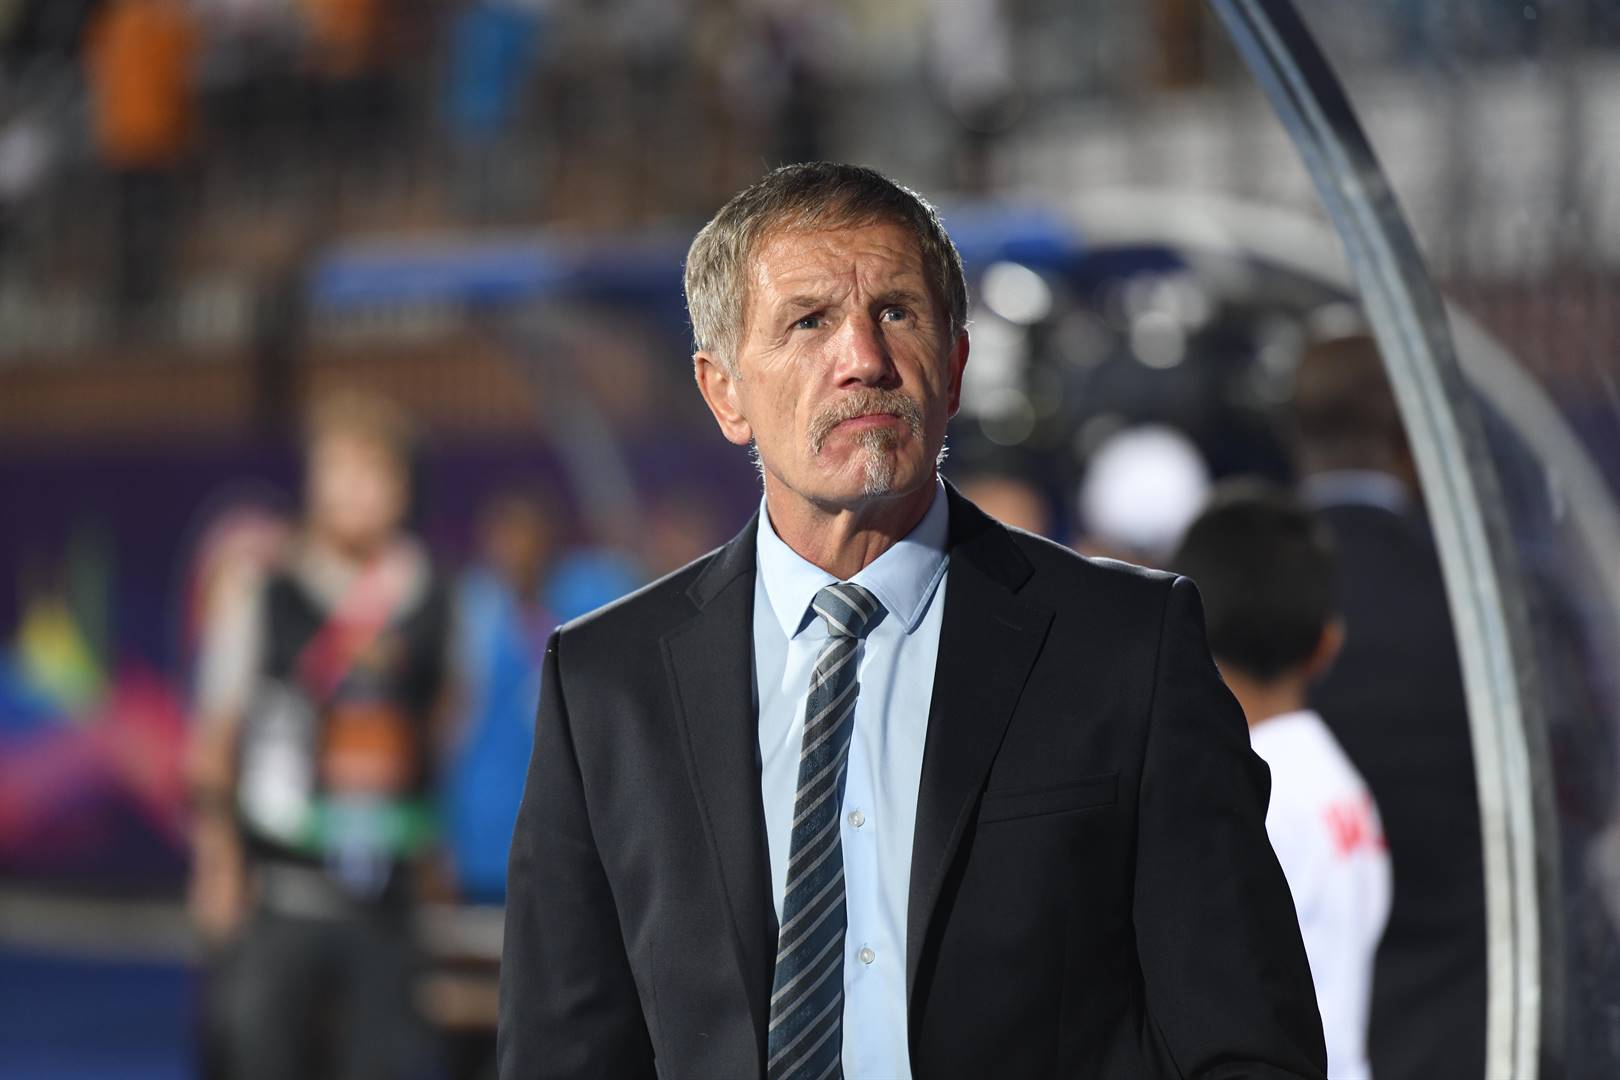 Stuart Baxter during the African Cup of Nations match between South Africa and Namibia at Al-Salam Stadium on Friday (June 28 2019) in Cairo, Egypt. Picture: Ahmed Hasan/Gallo Images 